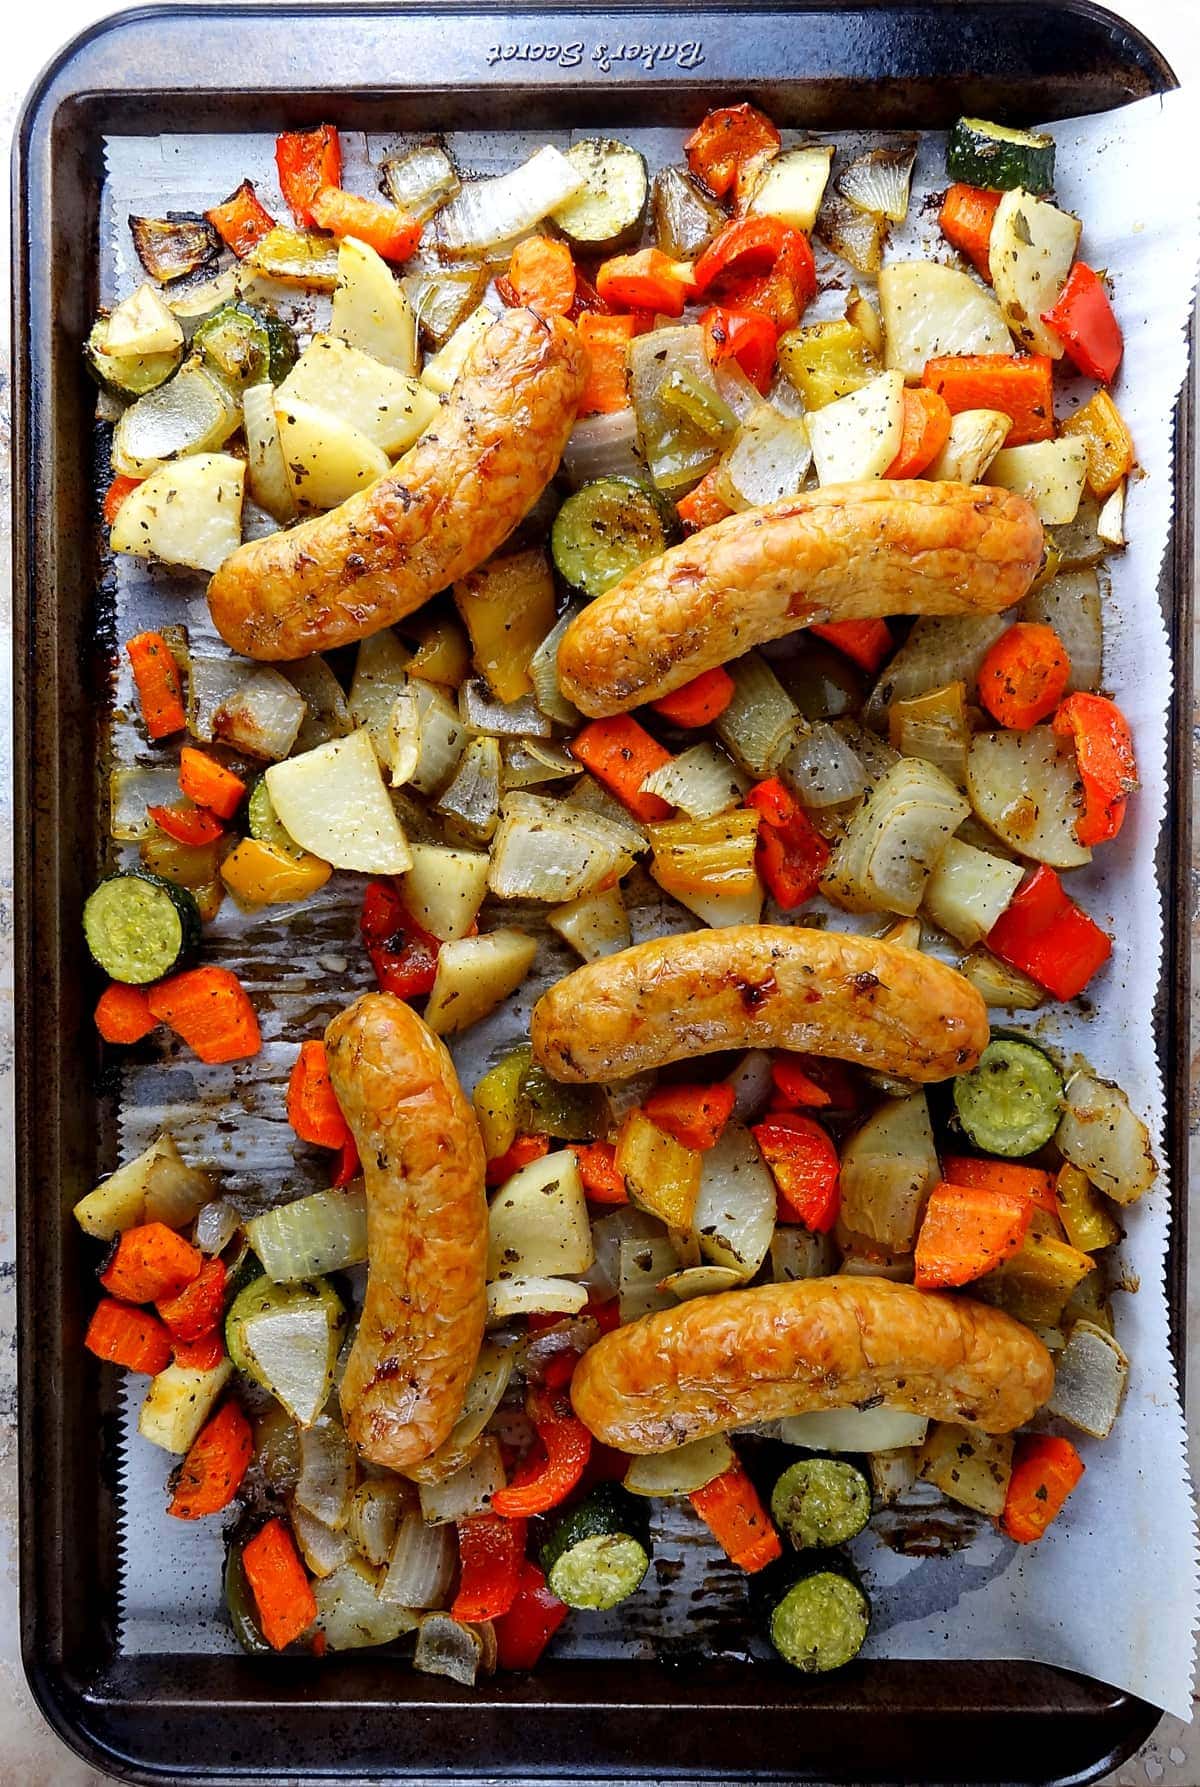 A plate of sausage and veggies